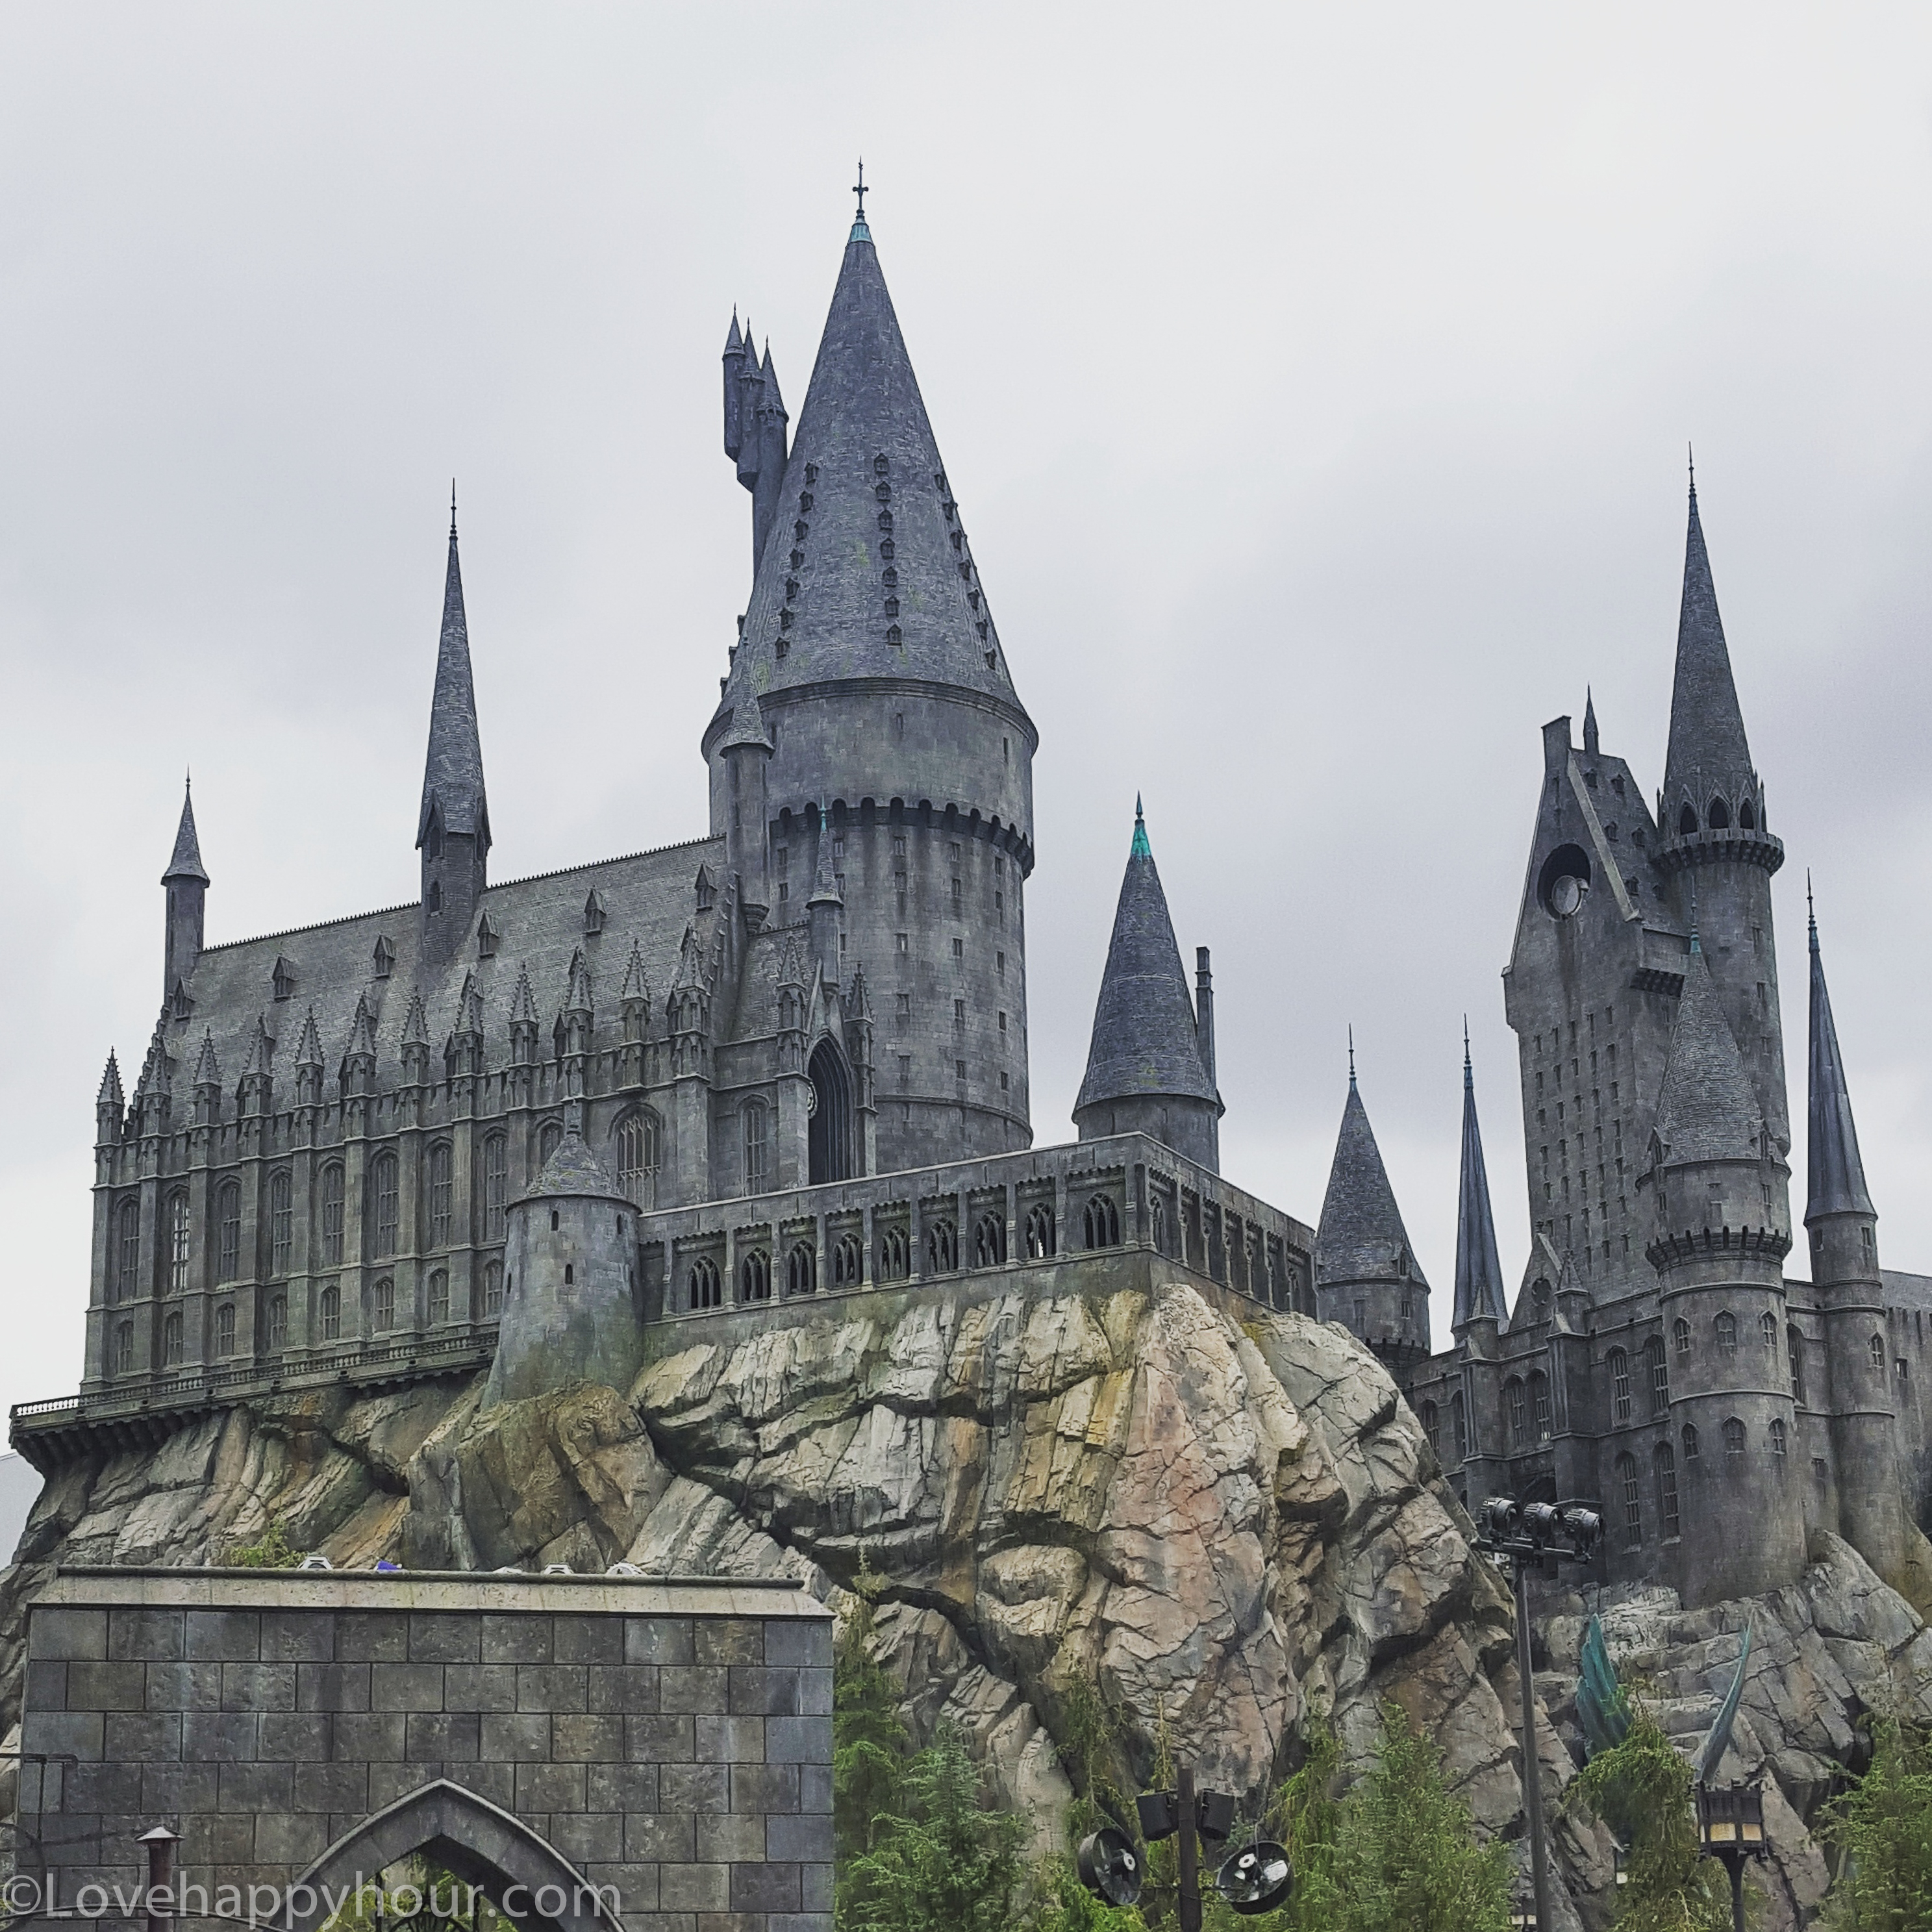 Hogwarts at the Wizarding World of Harry Potter (Universal Studios Hollywood).